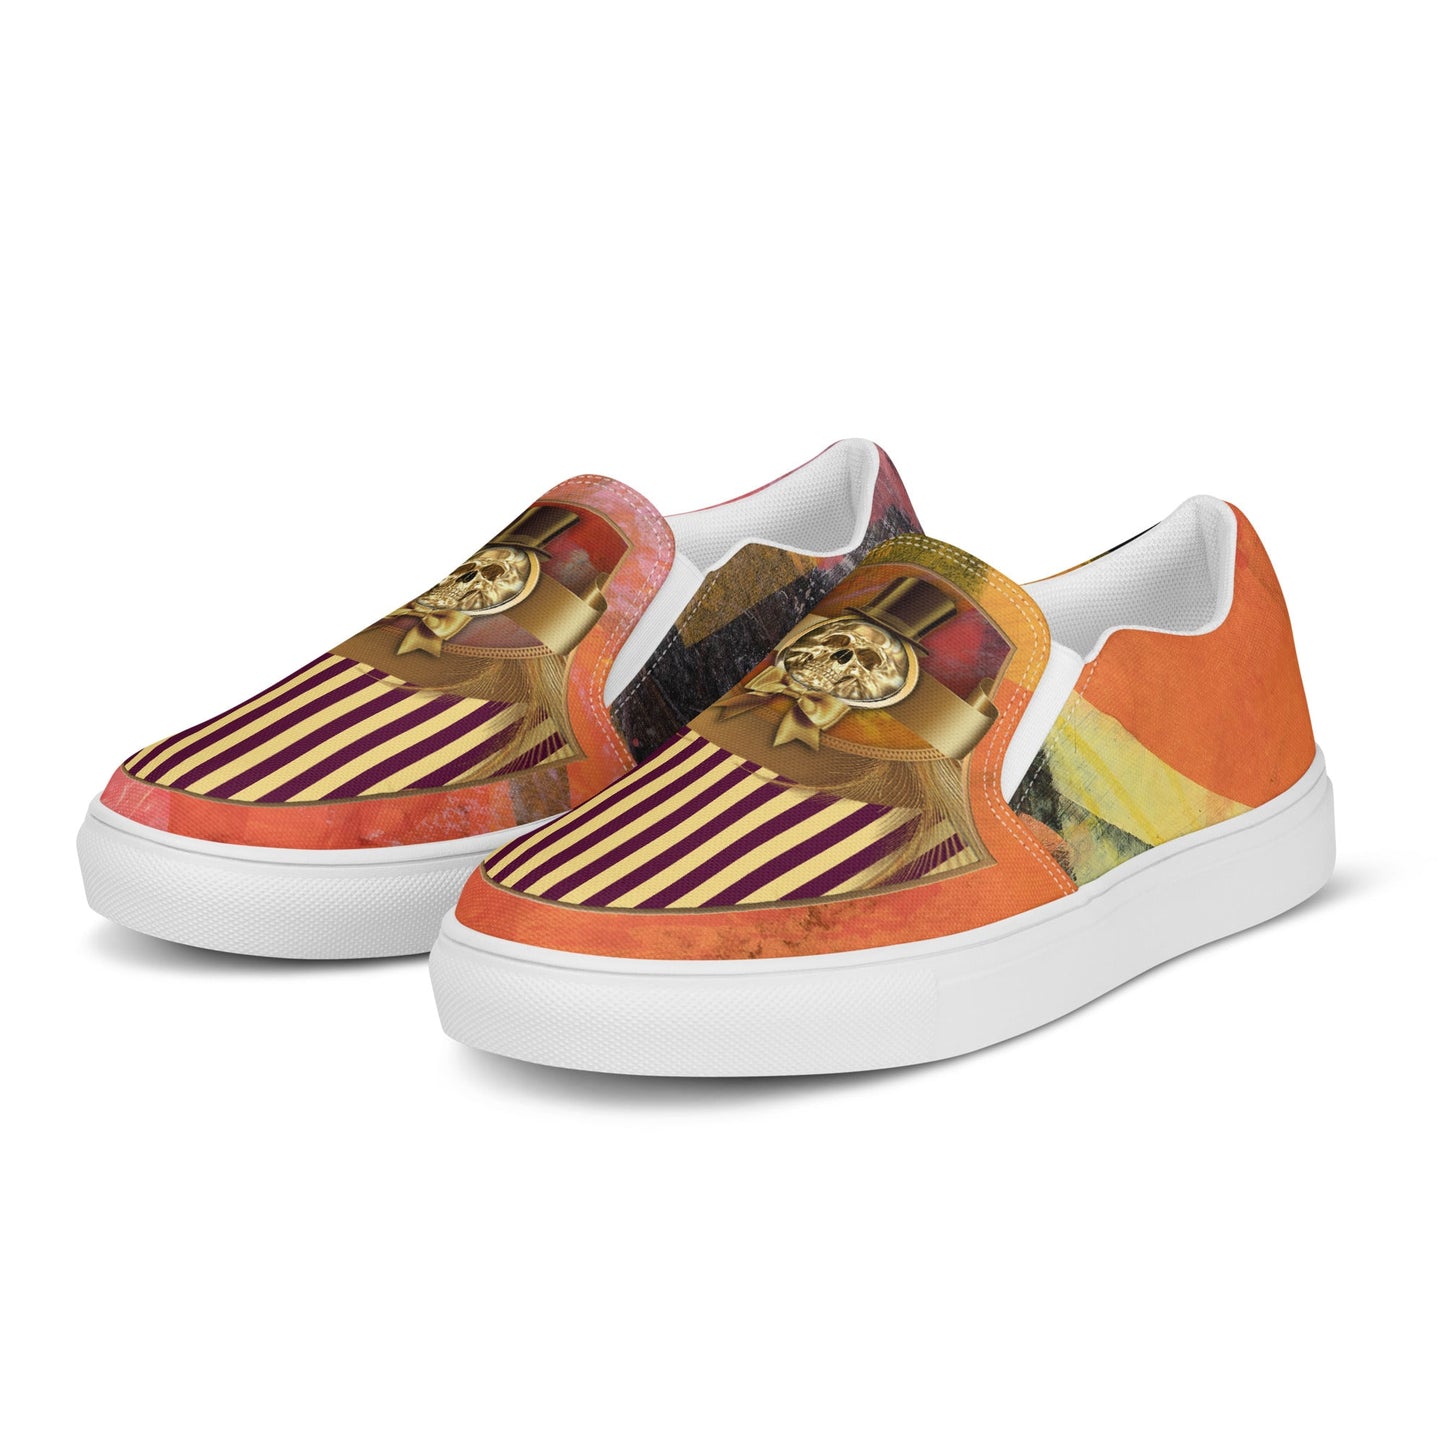 klasneakers Men’s slip-on canvas shoes - Gold Skull on Abstract